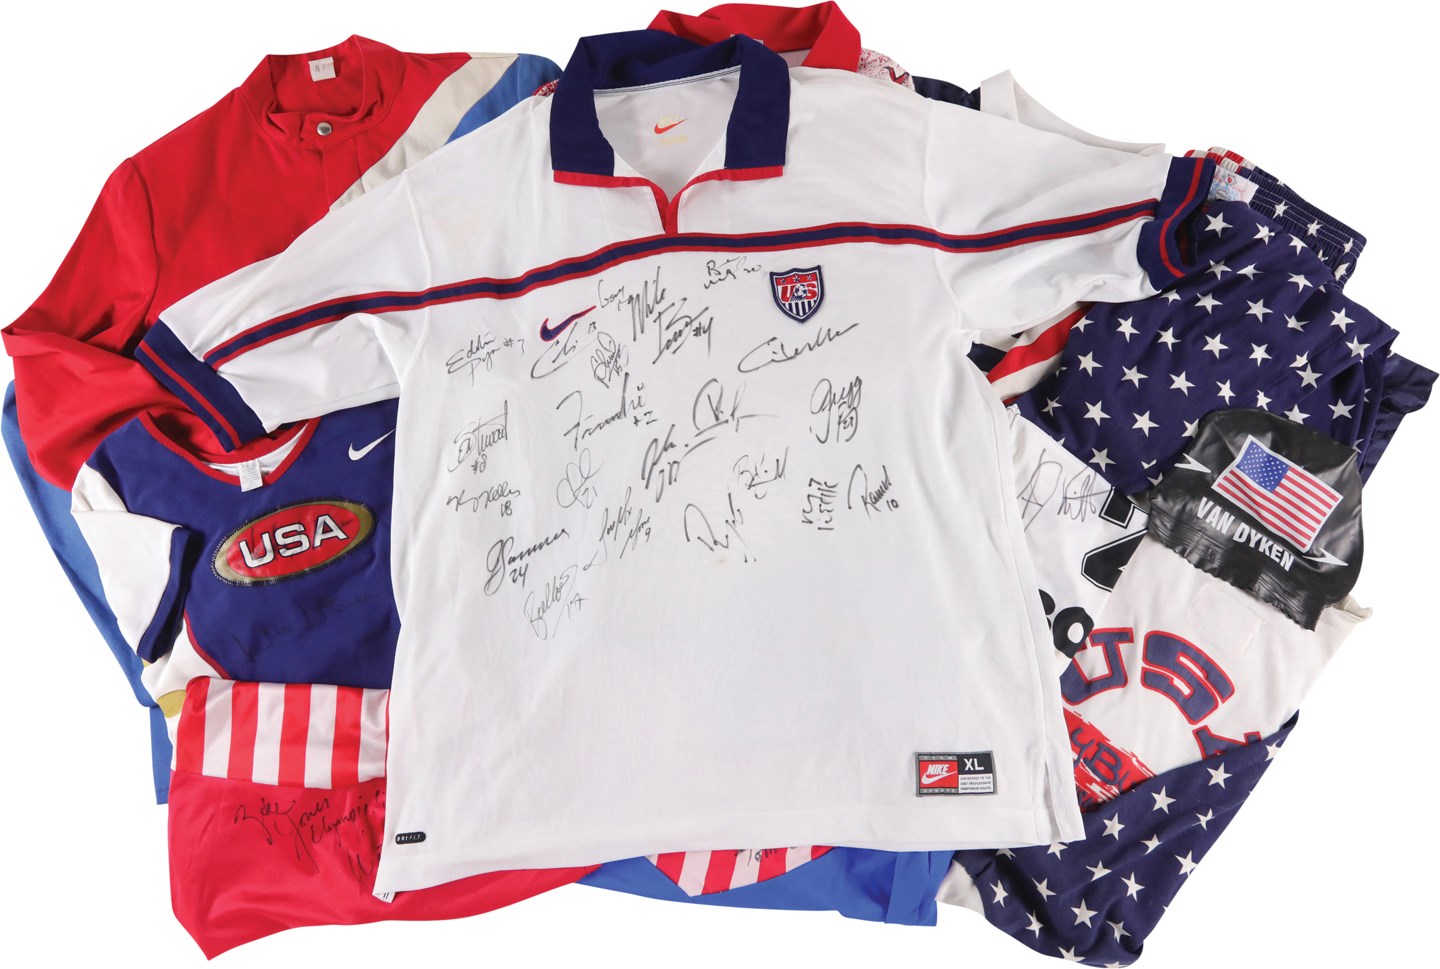 Olympics and All Sports - USA Sports Worn and Signed Equipment Collection (14)